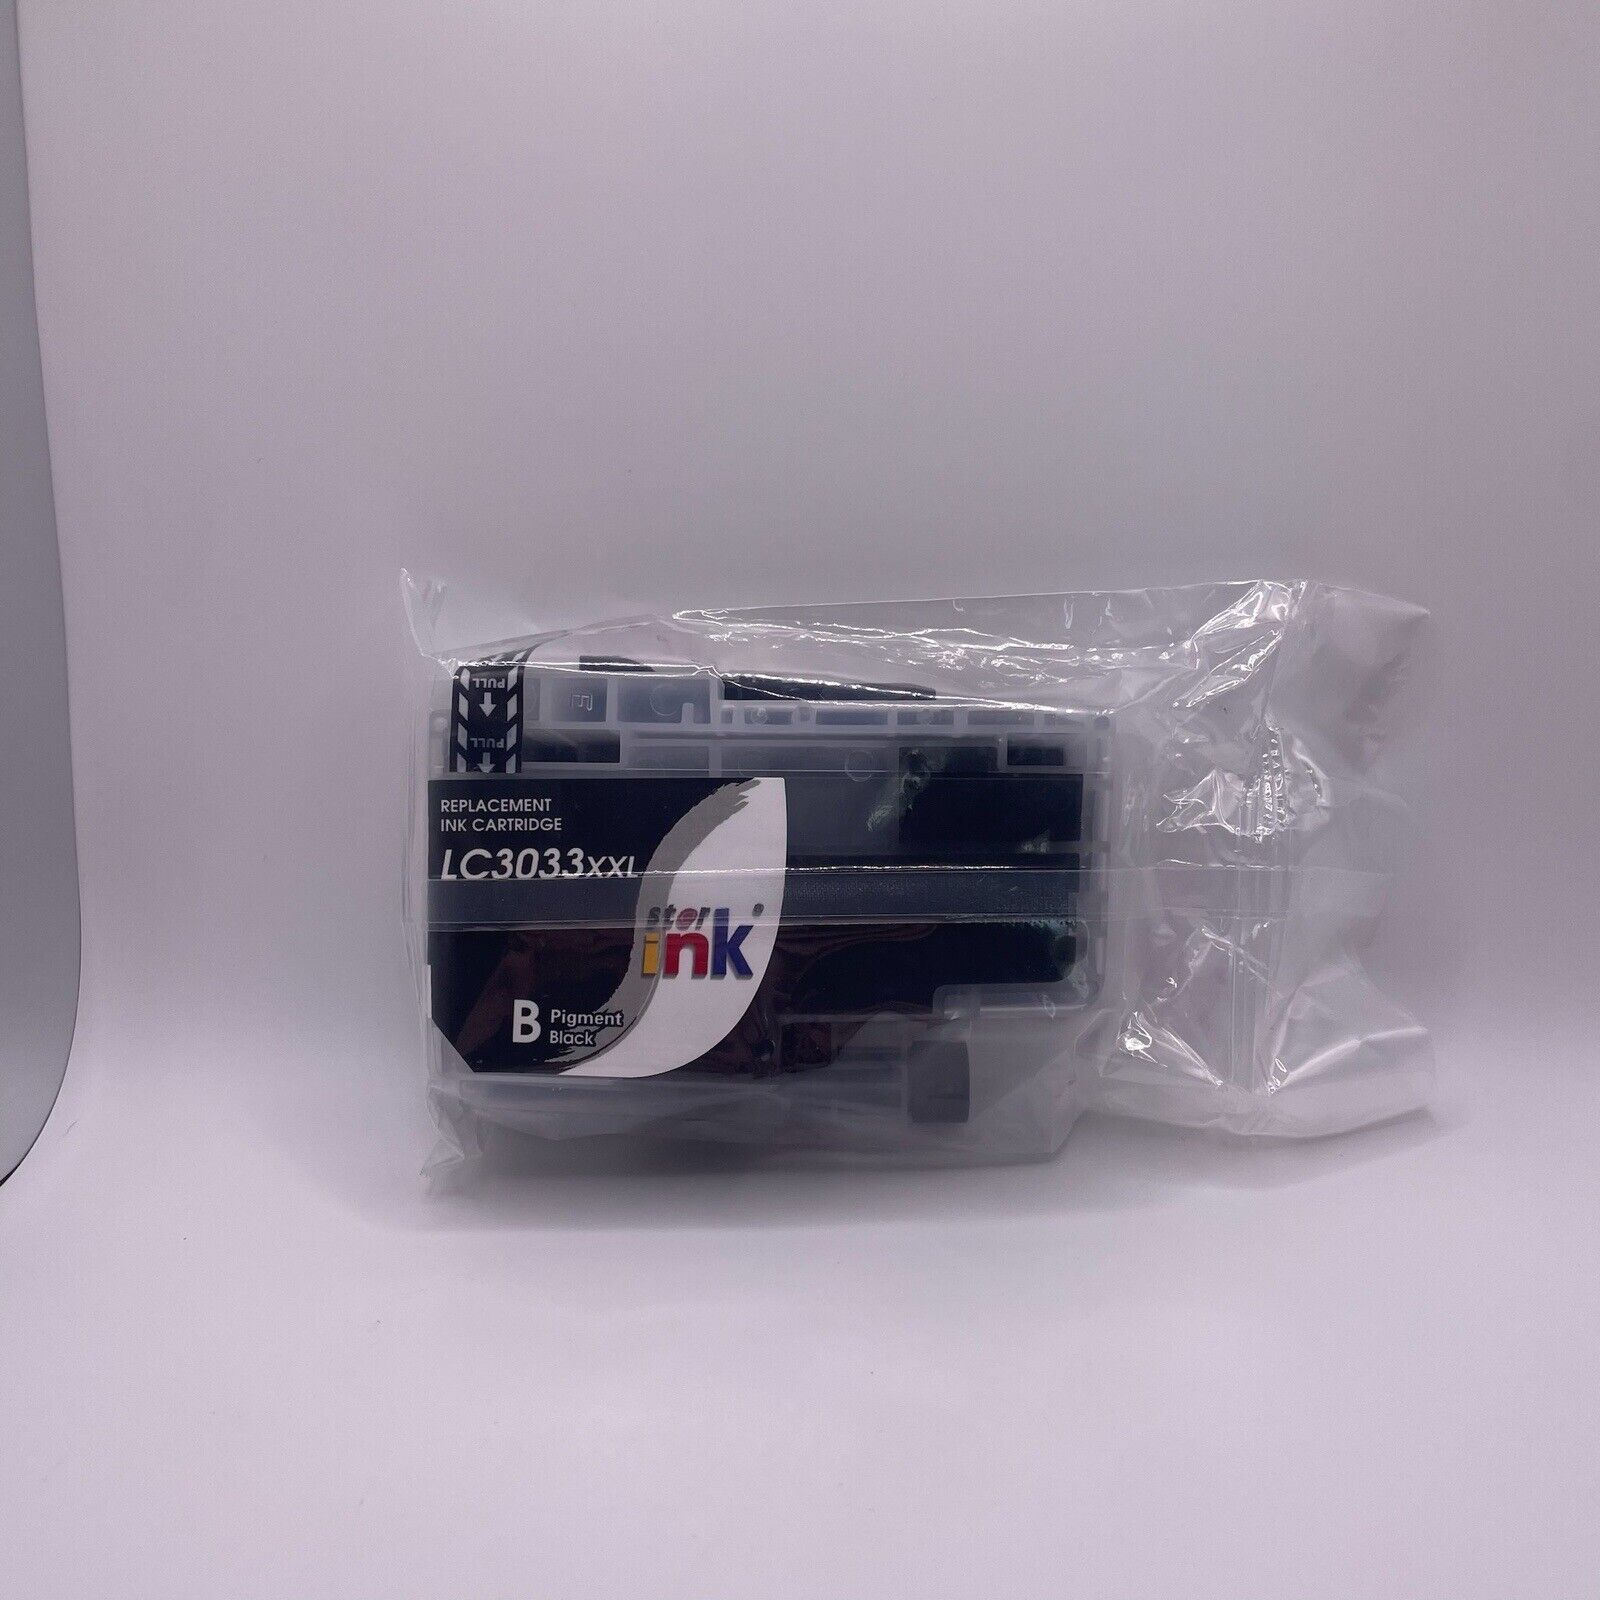 Replacement Ink Cartridge LC3033XXL Black Pigment Star Ink